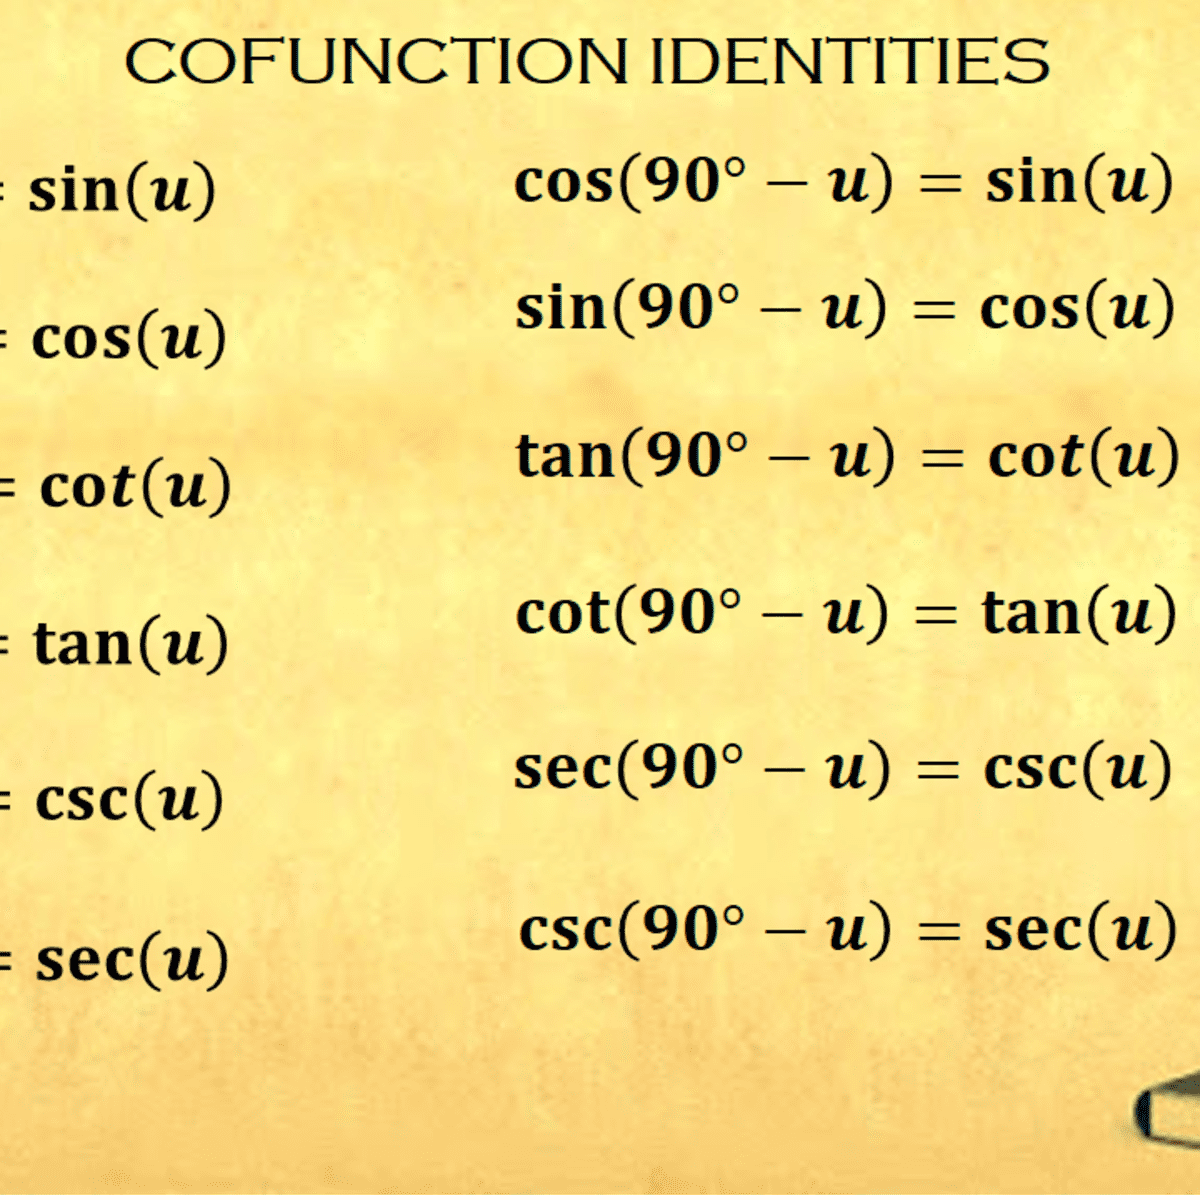 Cofunction Identities in Trigonometry (With Proof and Examples